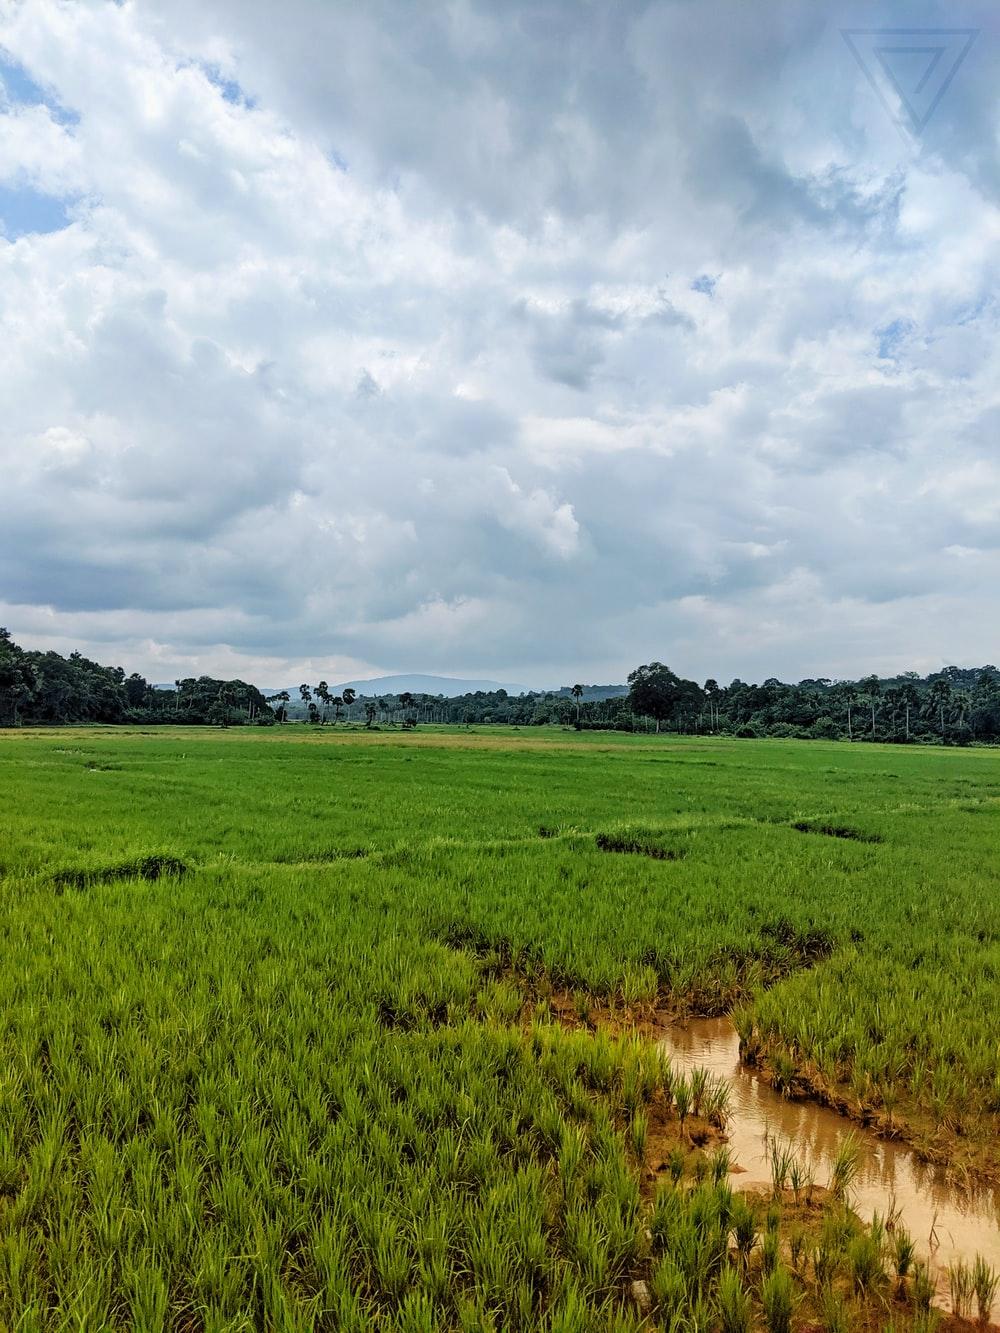 Paddy Field Picture. Download Free Image